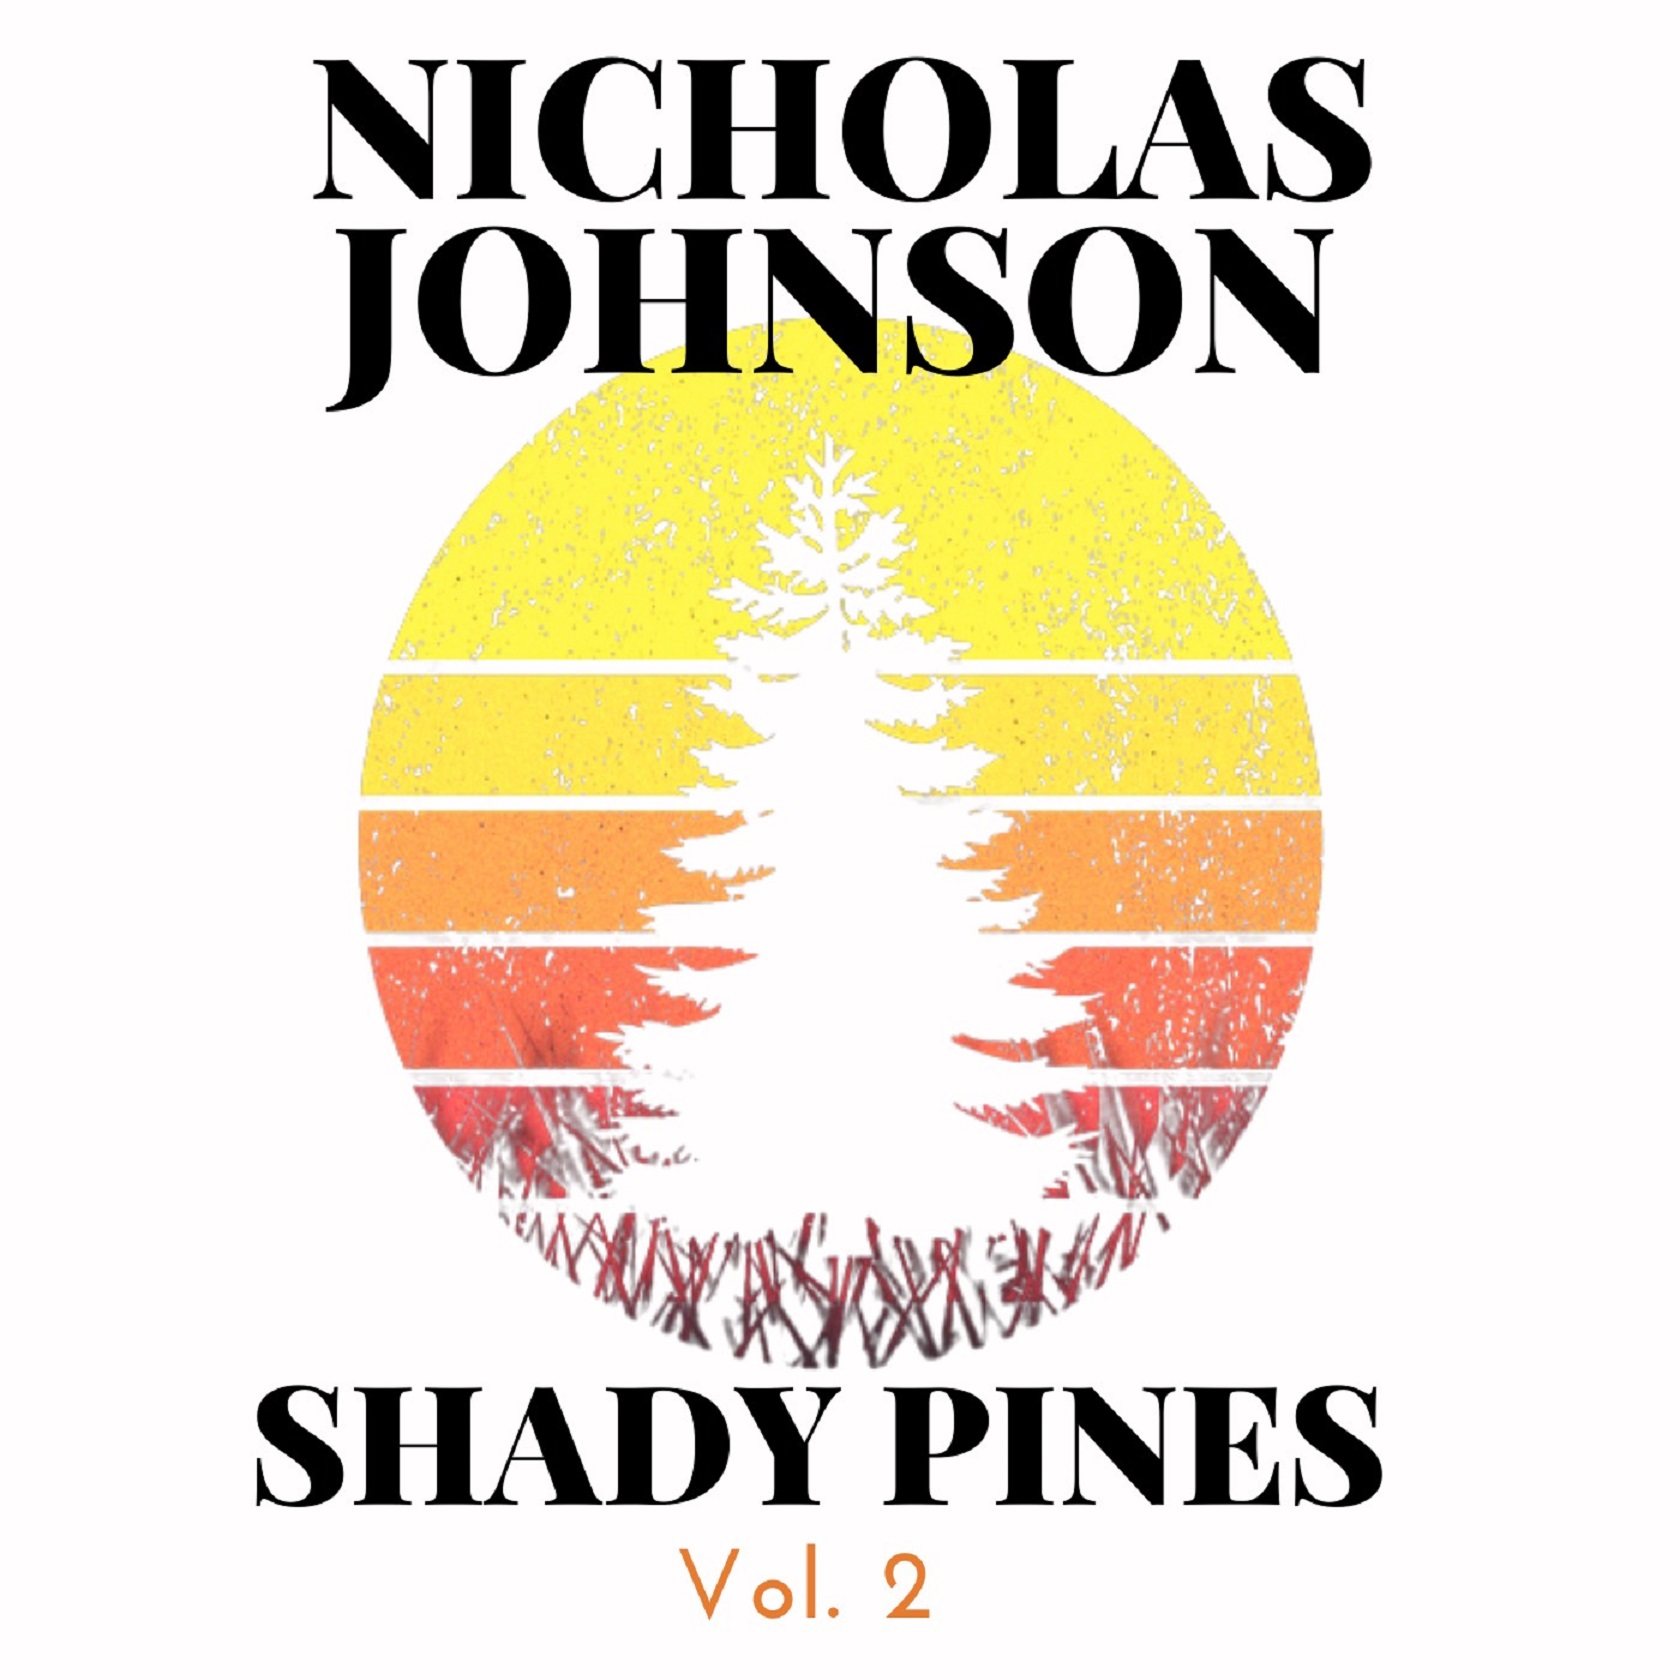 OHIO’S NICHOLAS JOHNSON BLENDS MIDWEST RUST-BELT ROCK AND SOUTHERN ROOTS ON HIS LATEST, SHADY PINES VOL. 2